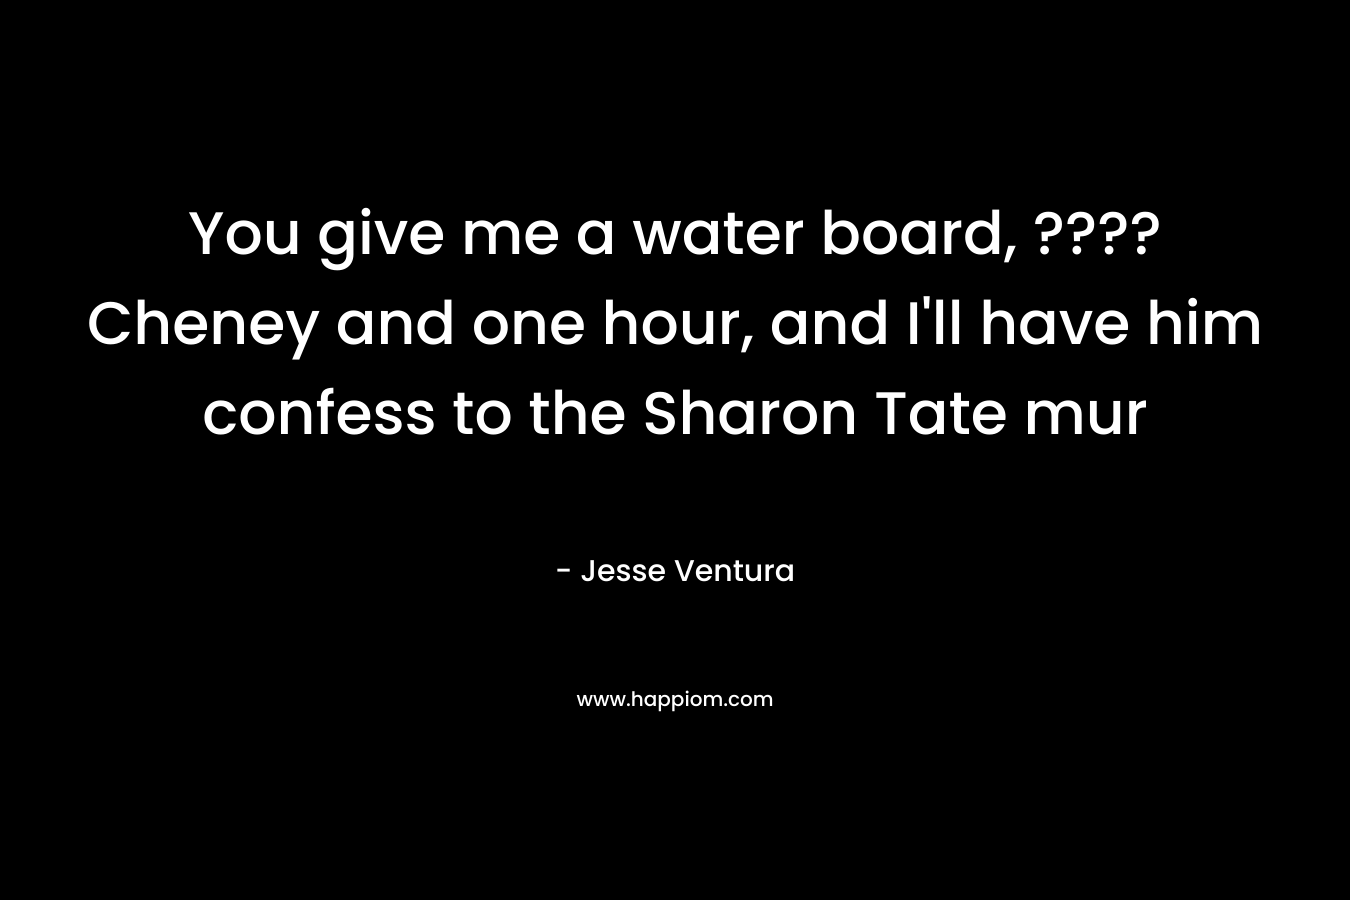 You give me a water board, ???? Cheney and one hour, and I’ll have him confess to the Sharon Tate mur – Jesse Ventura